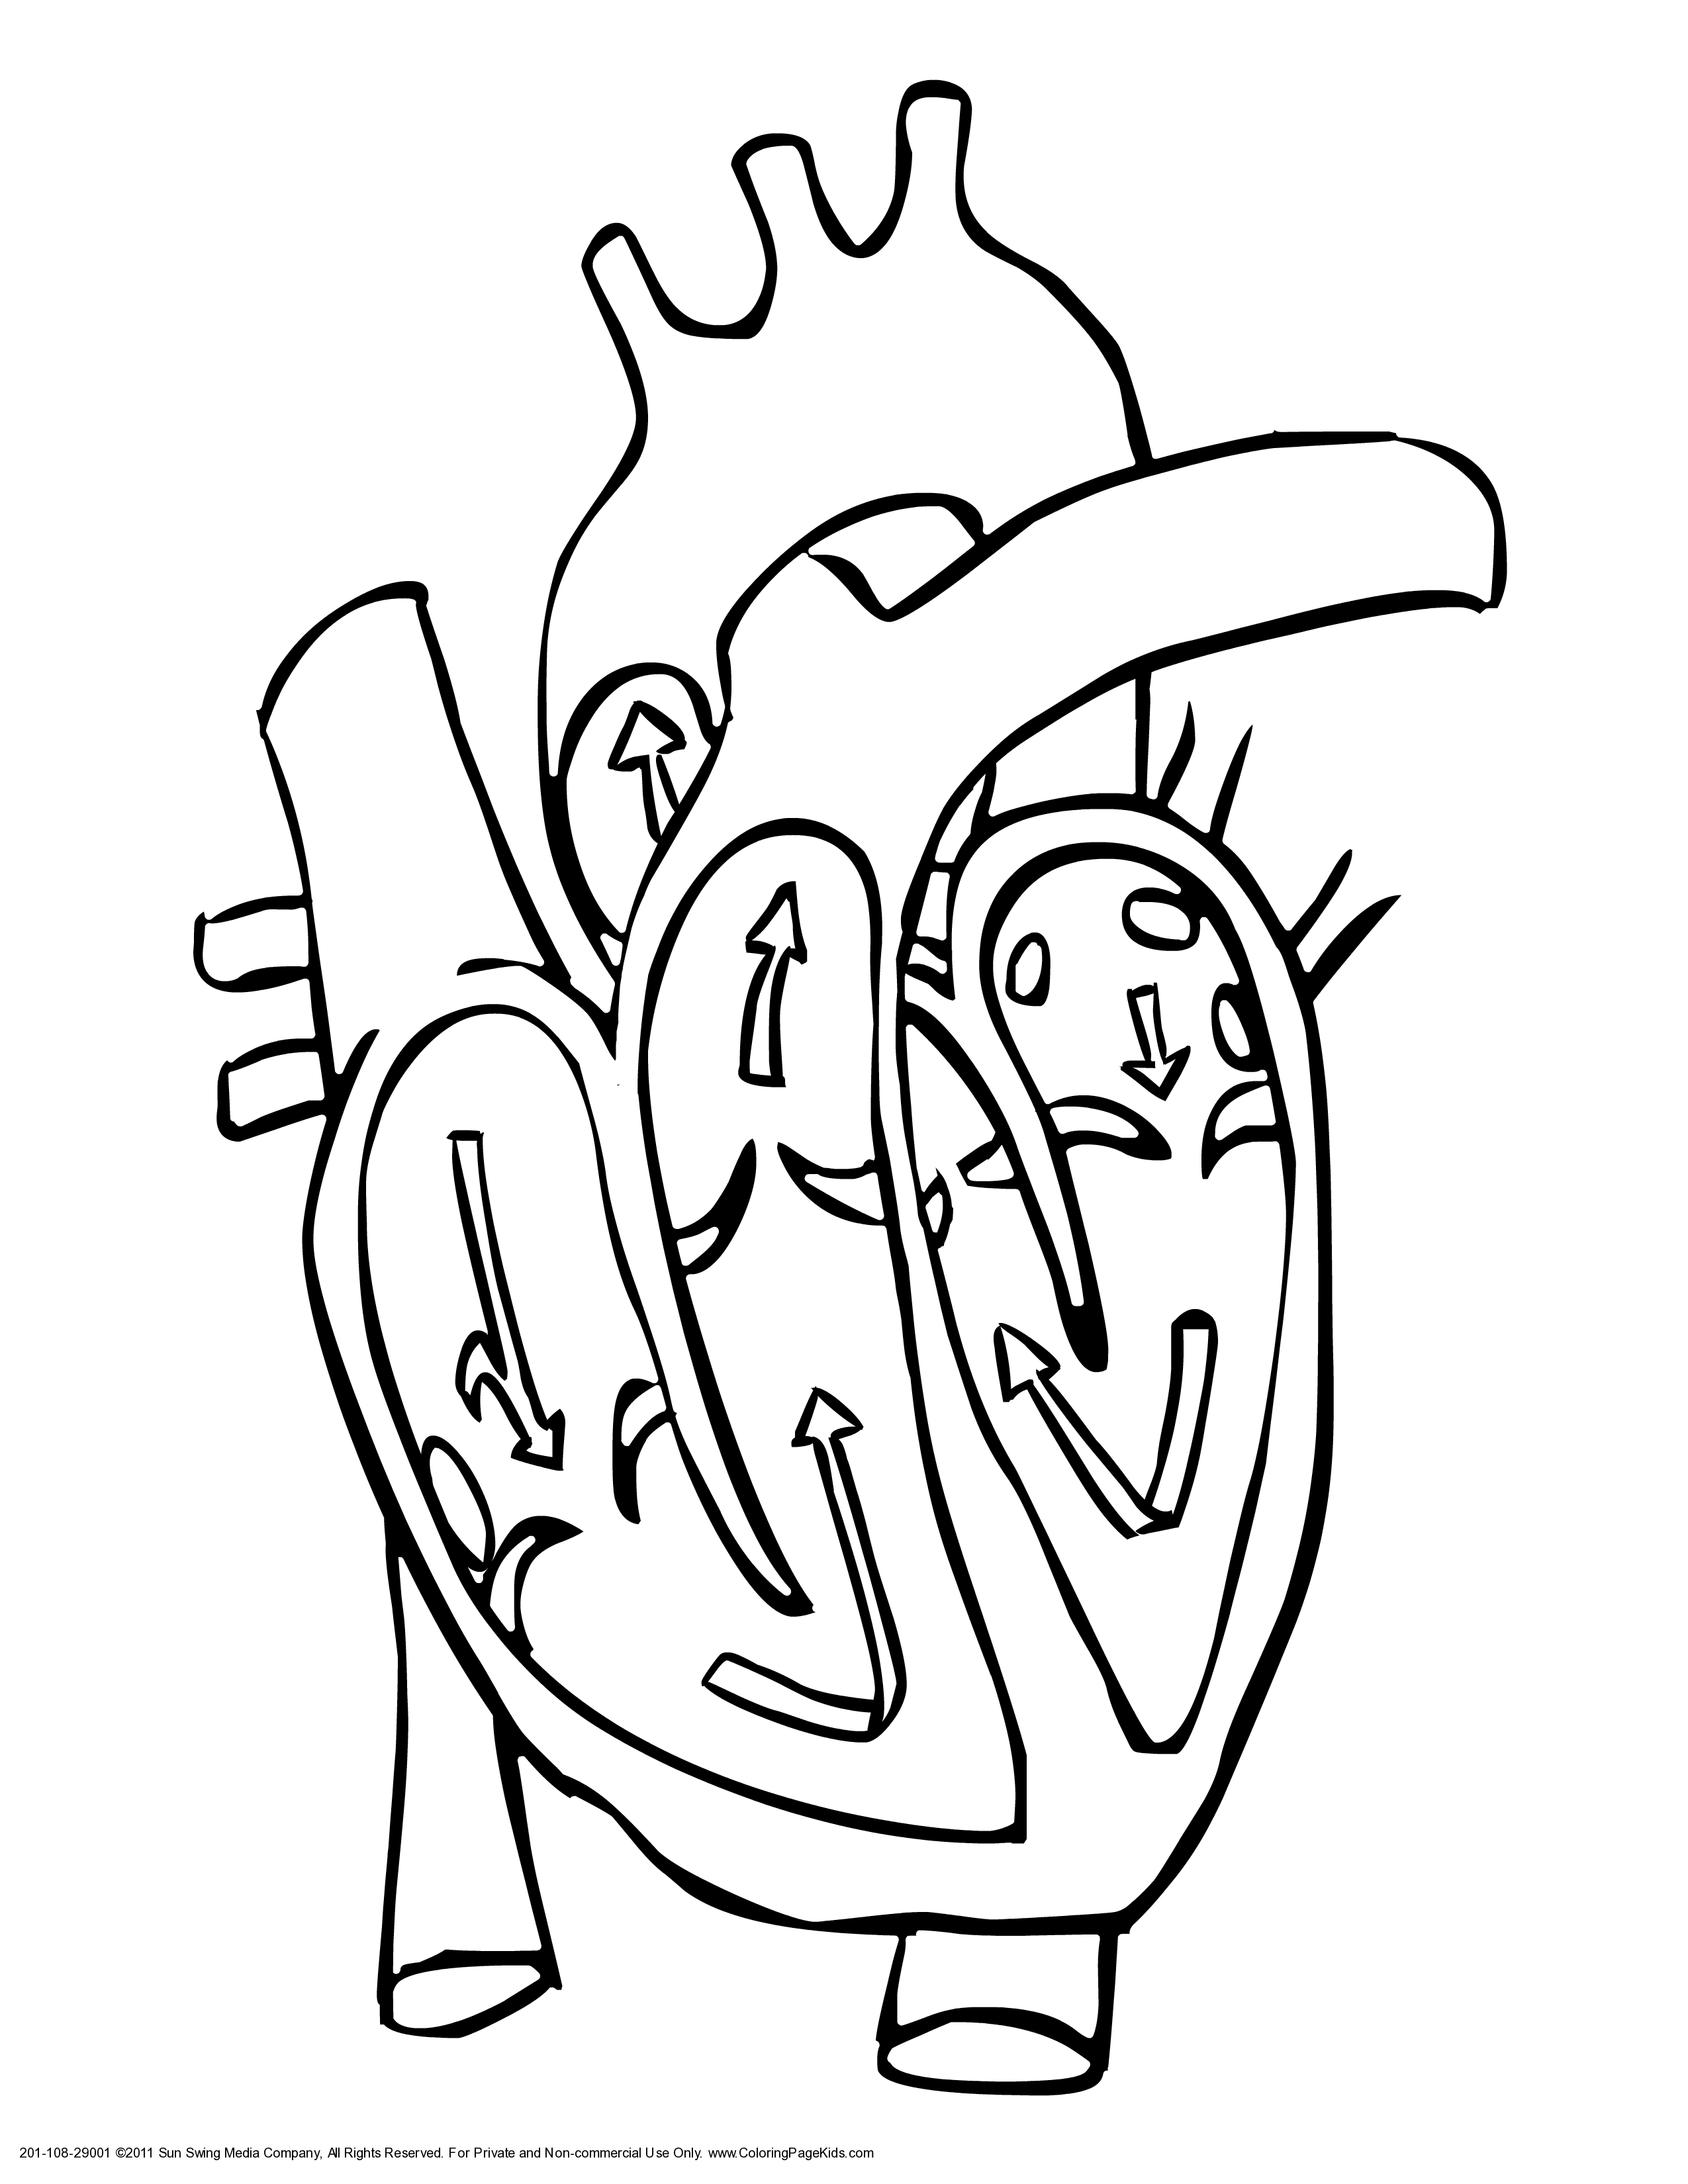 Human Body Heart Coloring Pages - High Quality Coloring Pages